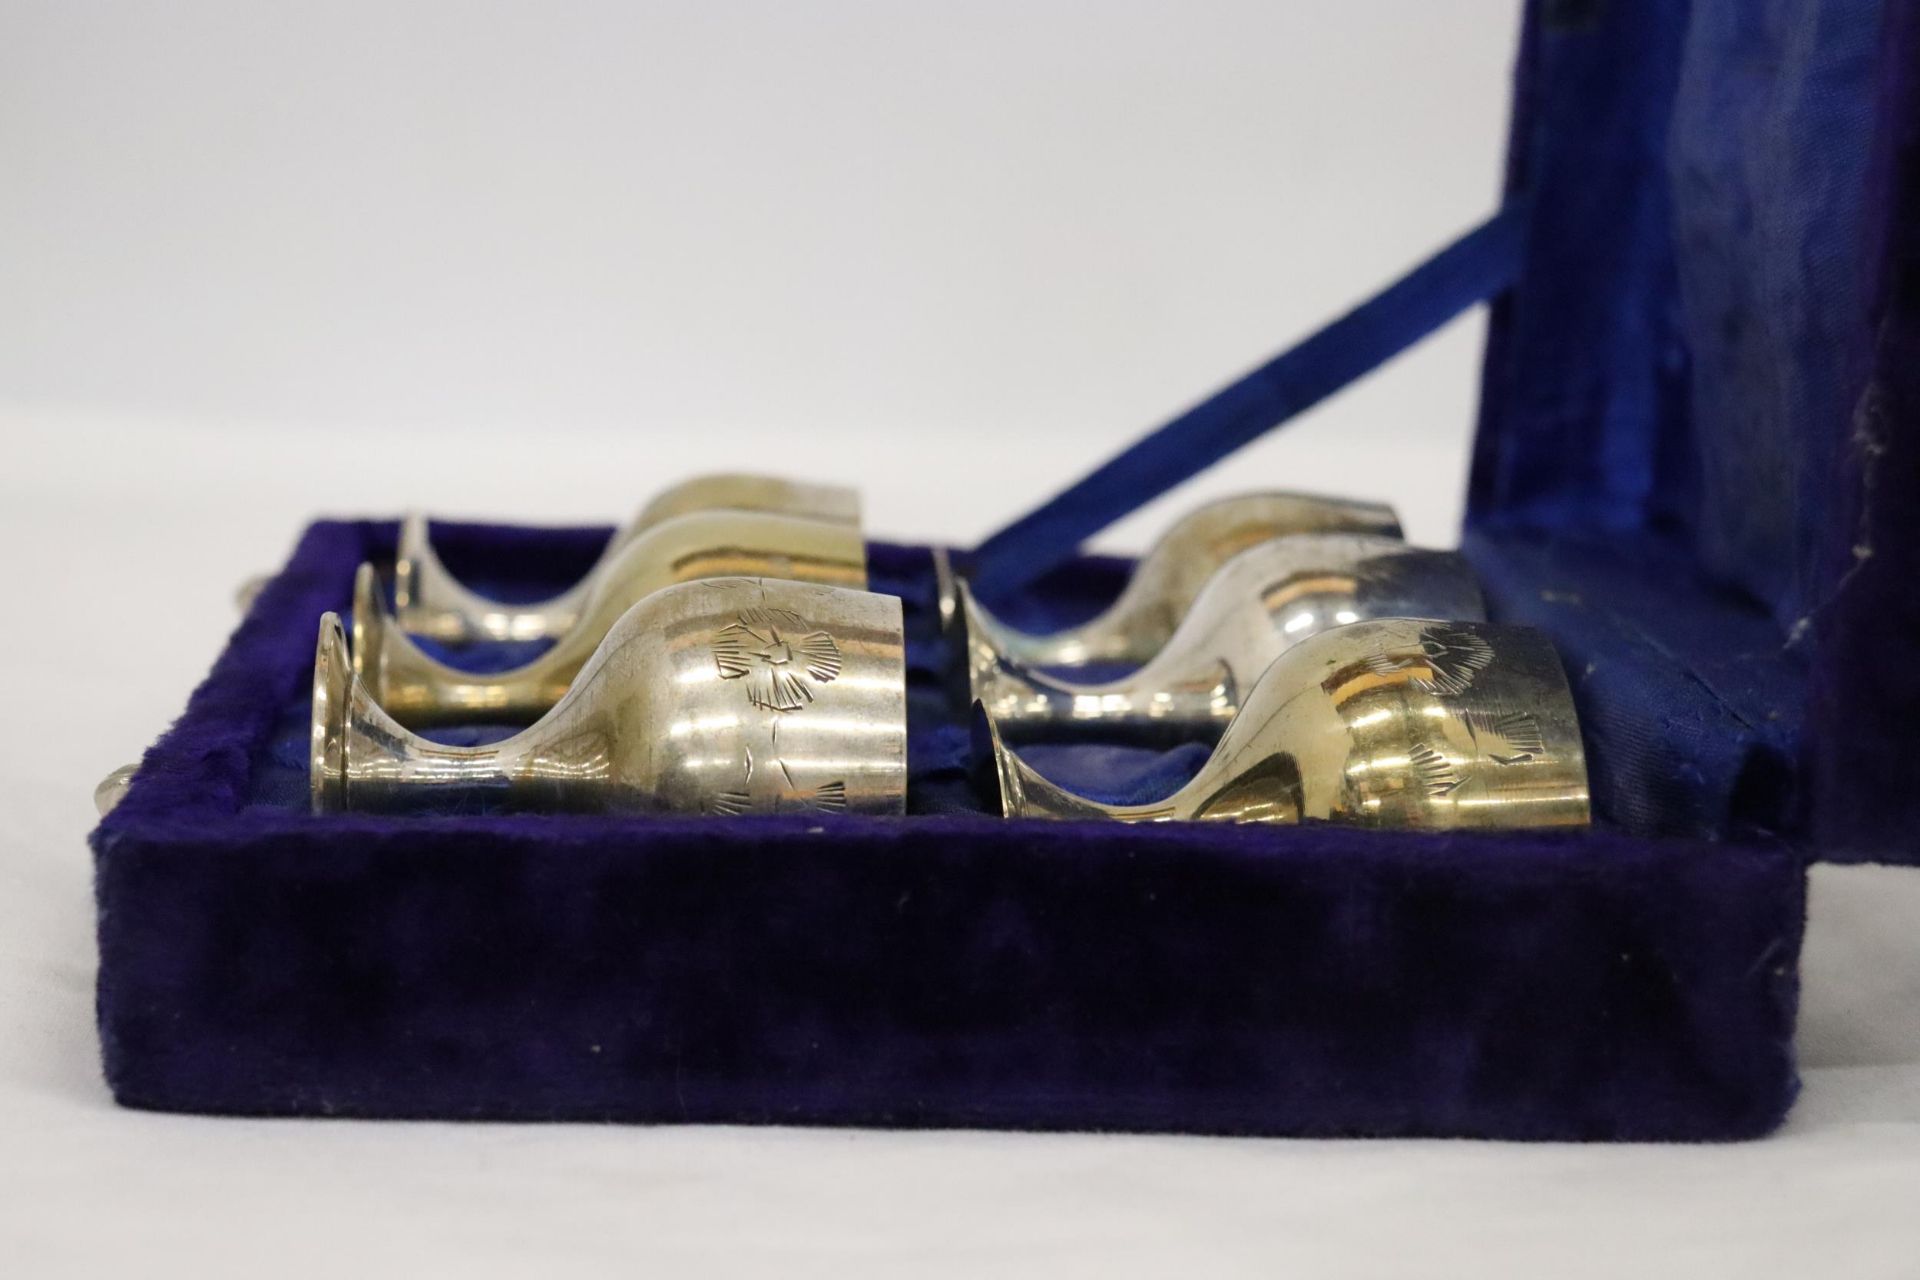 A SET OF SIX SMALL SILVER PLATED GOBLETS IN A PRESENTATION CASE - Image 6 of 7